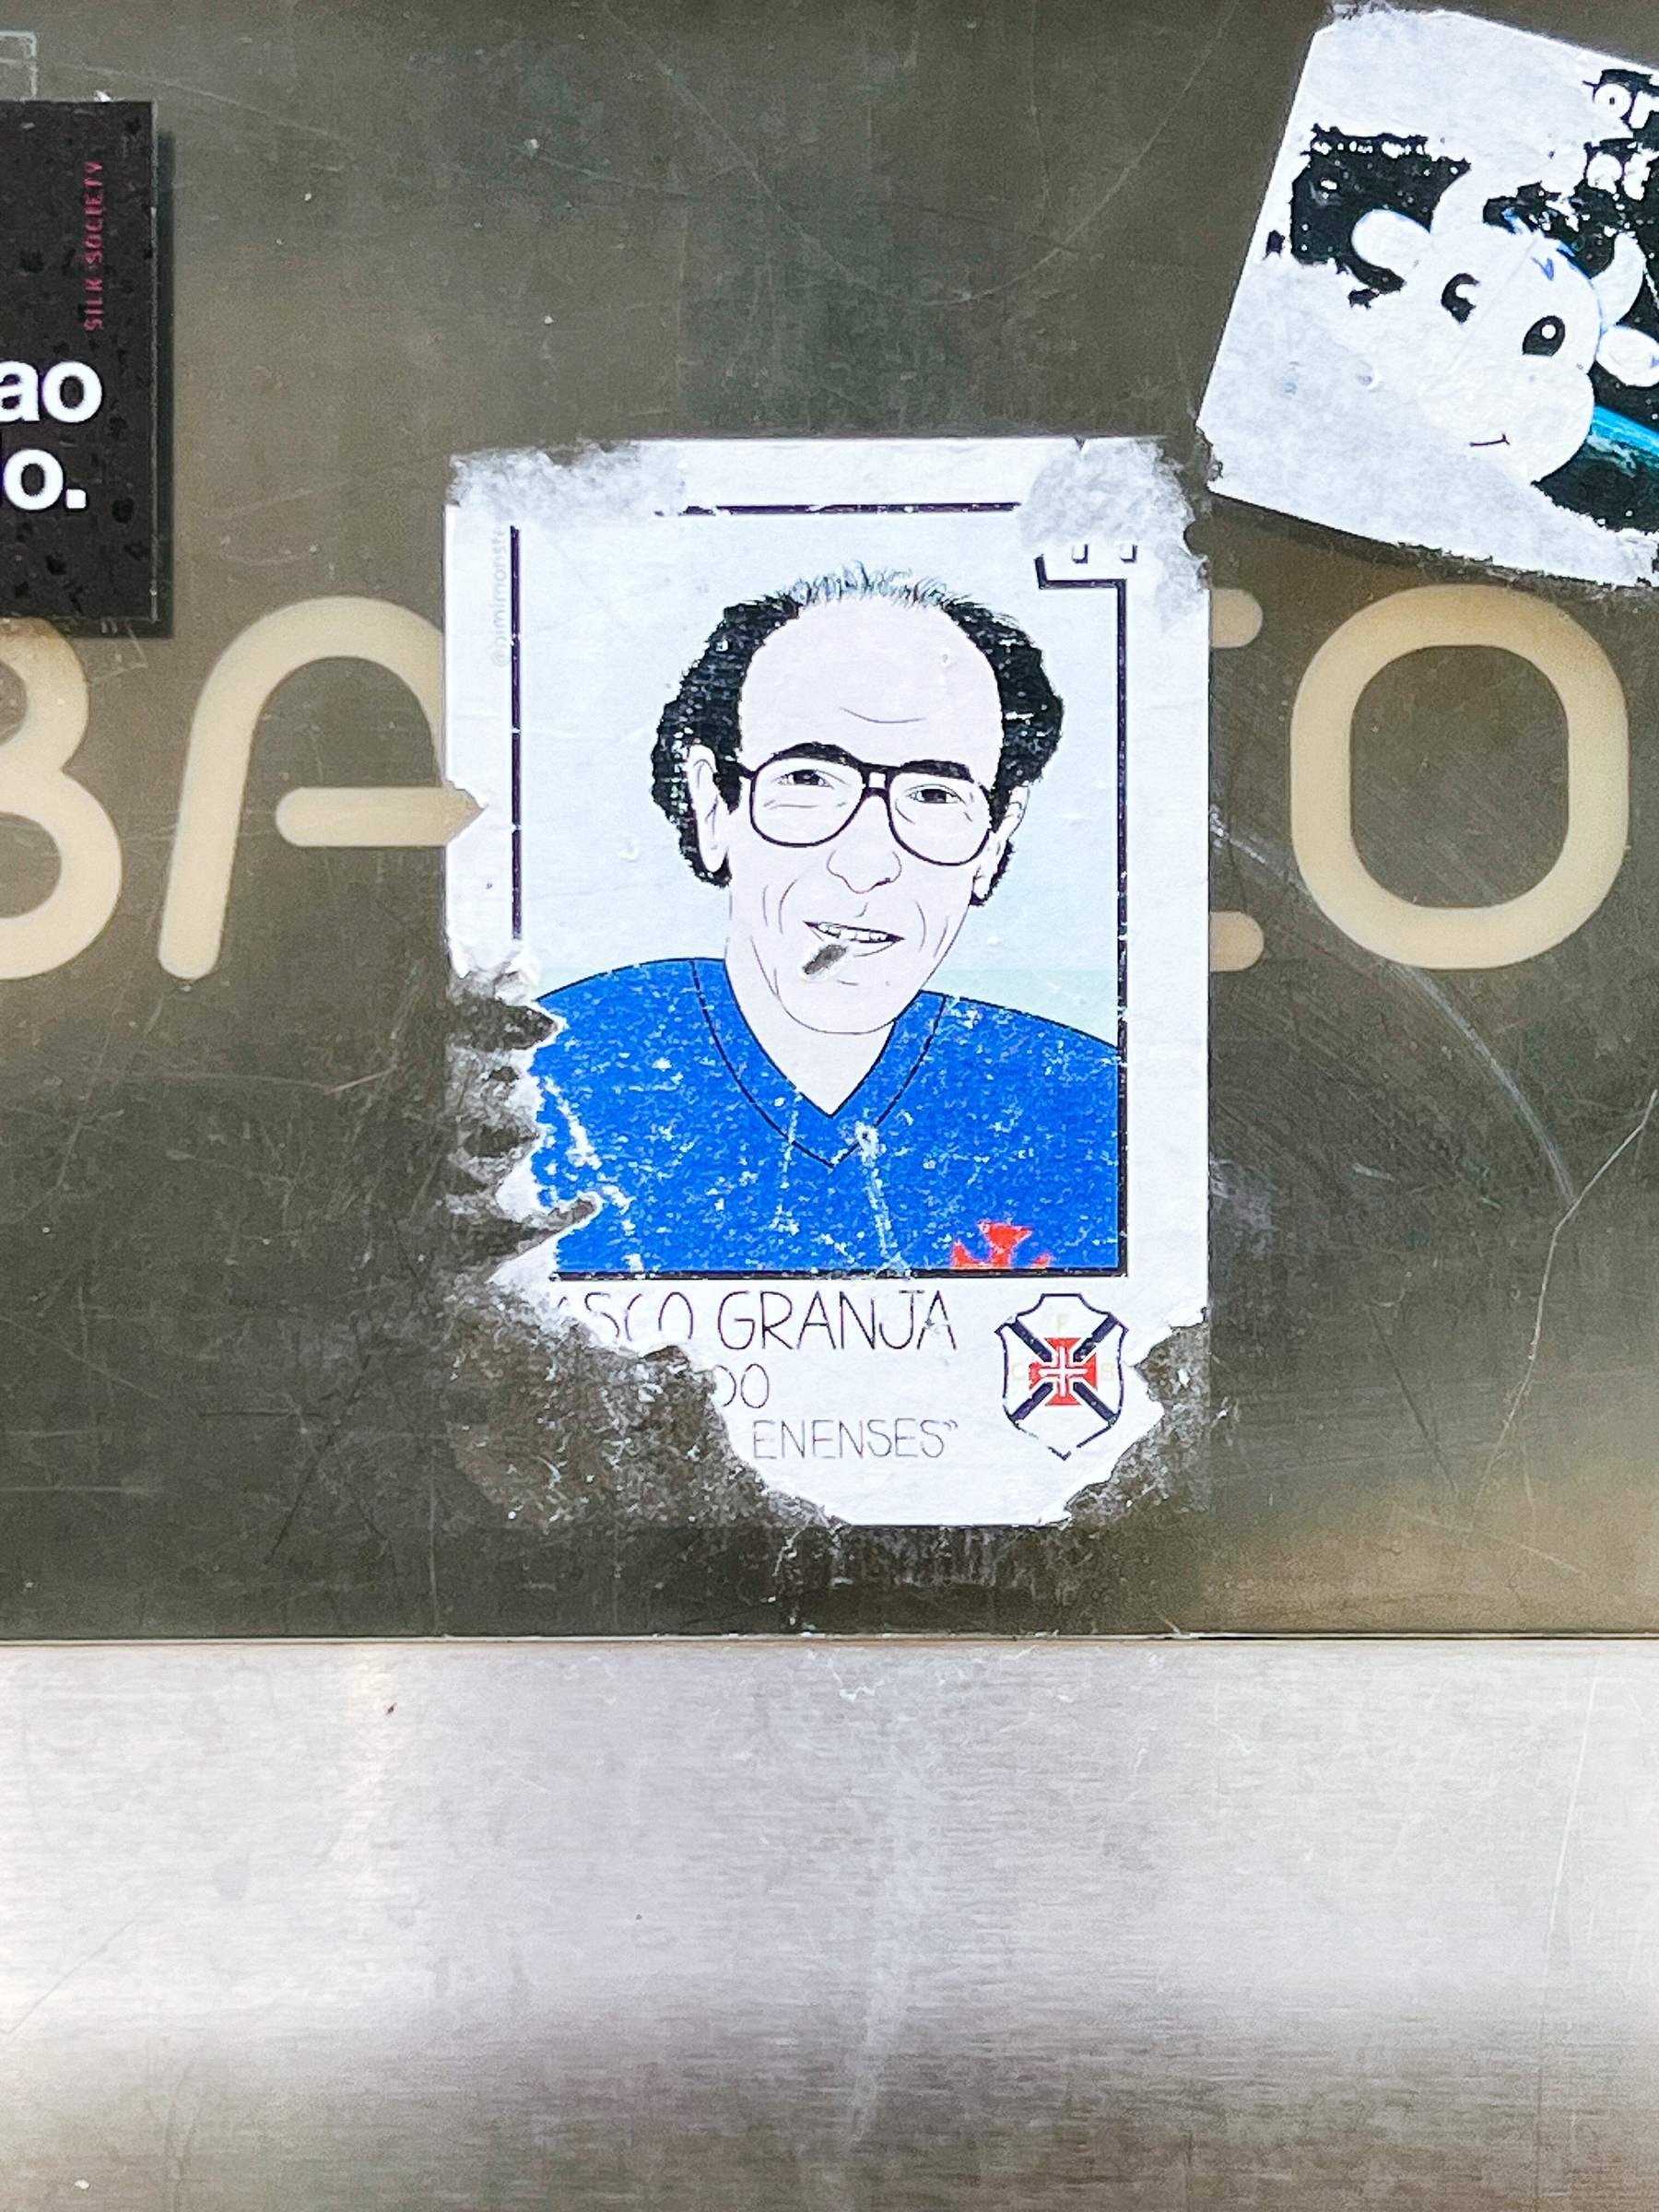 A sticker depicting a man&rsquo;s portrait is affixed to a metallic surface, surrounded by other partial stickers and graffiti.